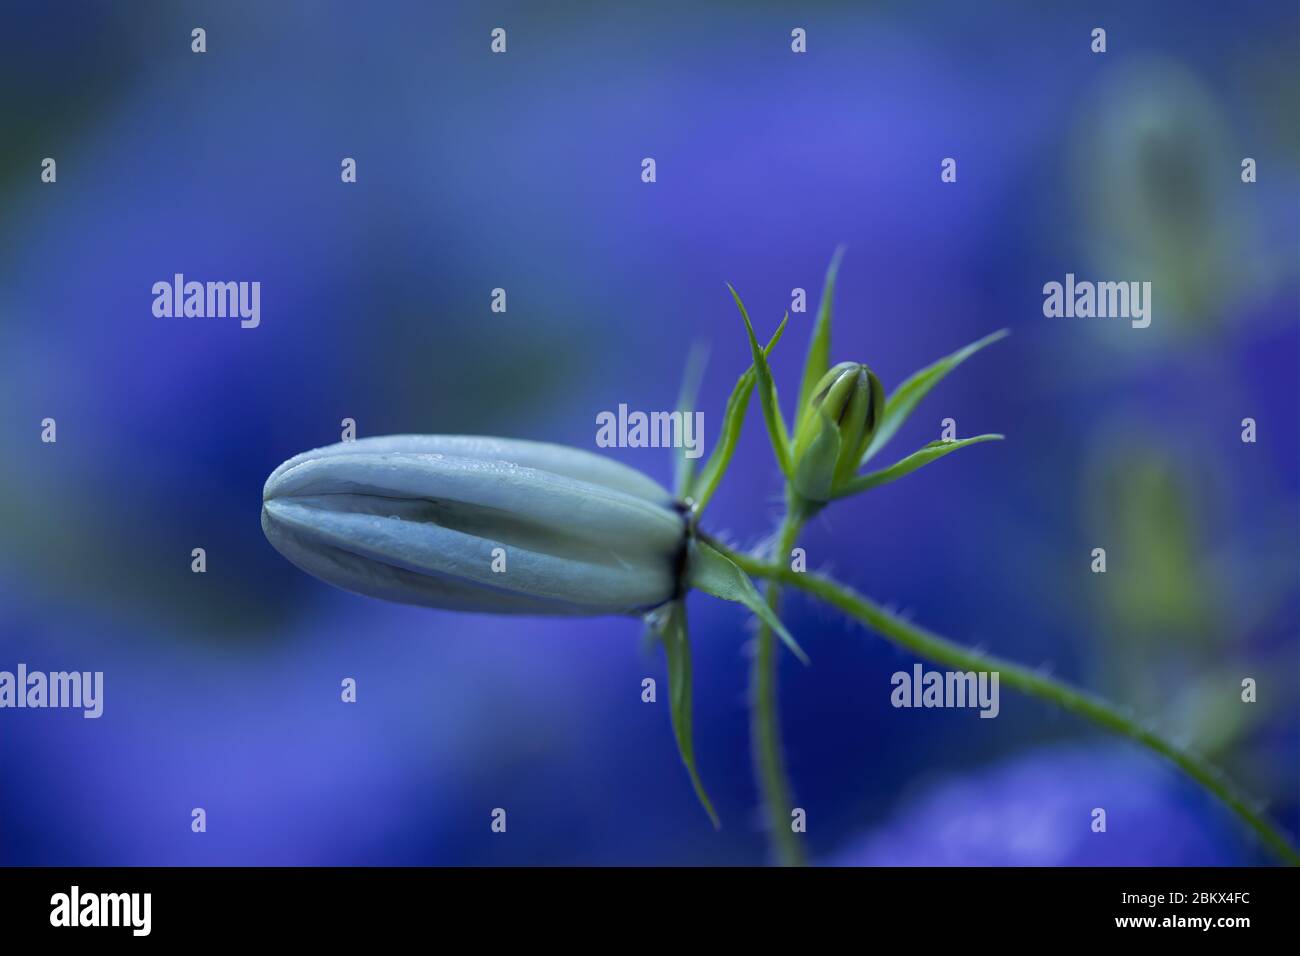 Macro image oa Campanula buds with out of focus flowers in the background. Stock Photo